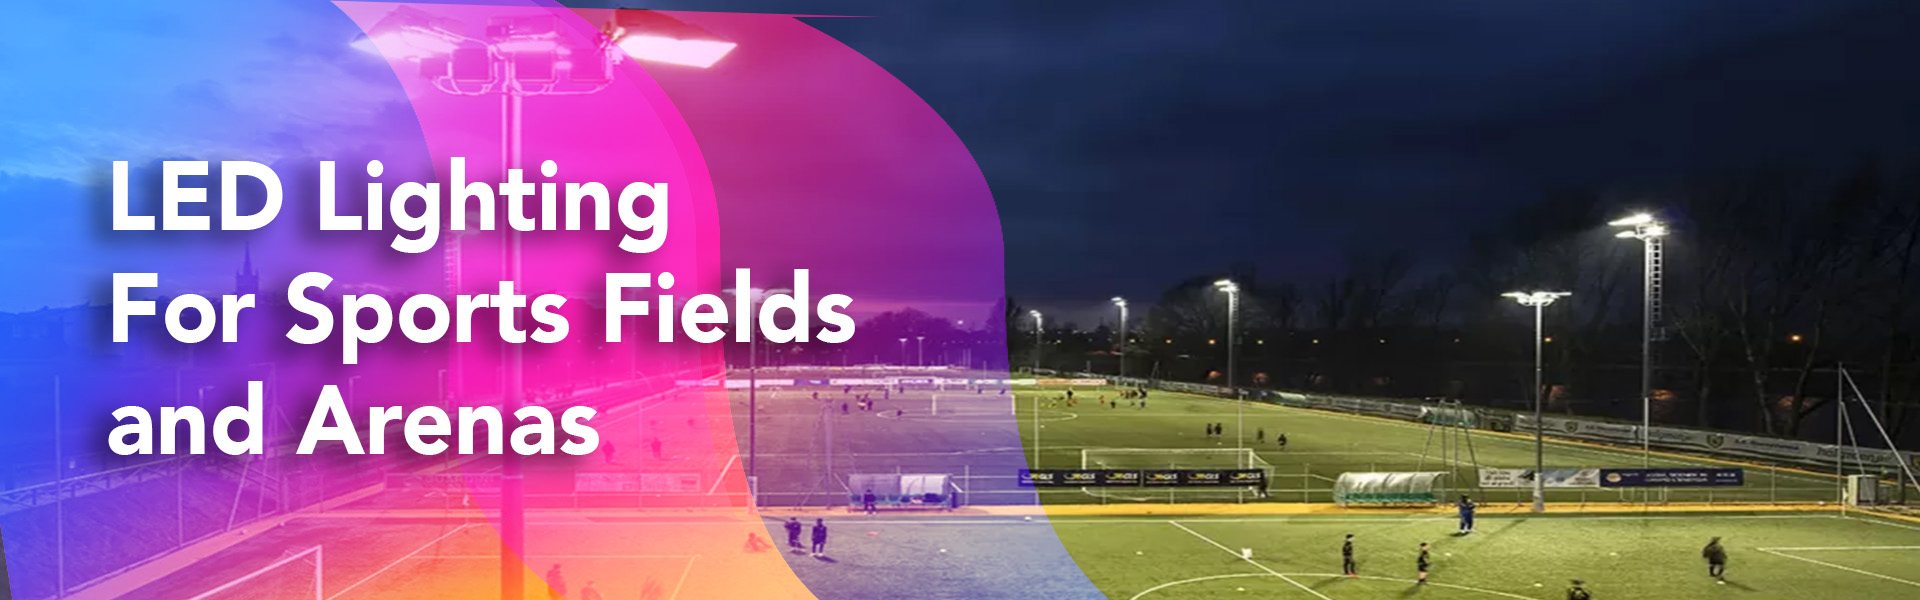 Led lighting for sports field and arenas